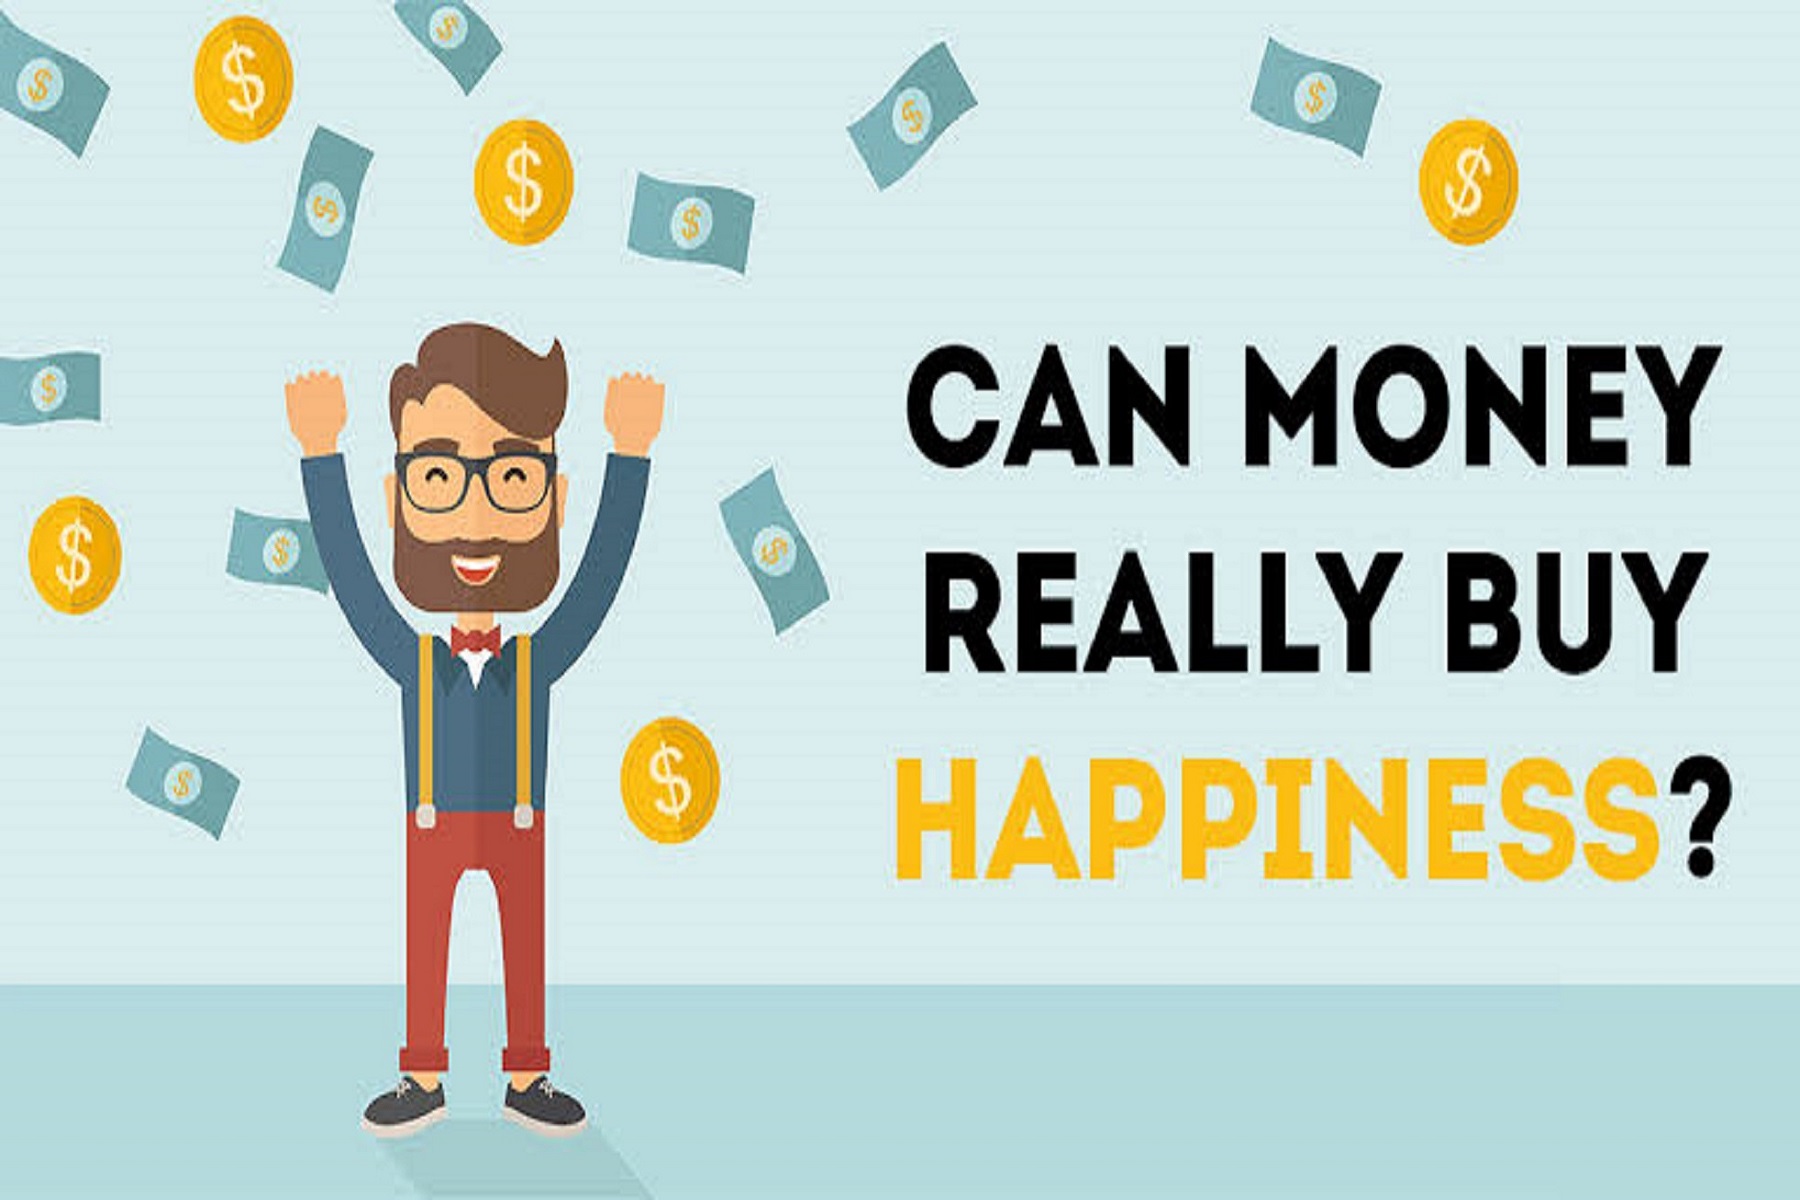 Money CAN buy Happiness